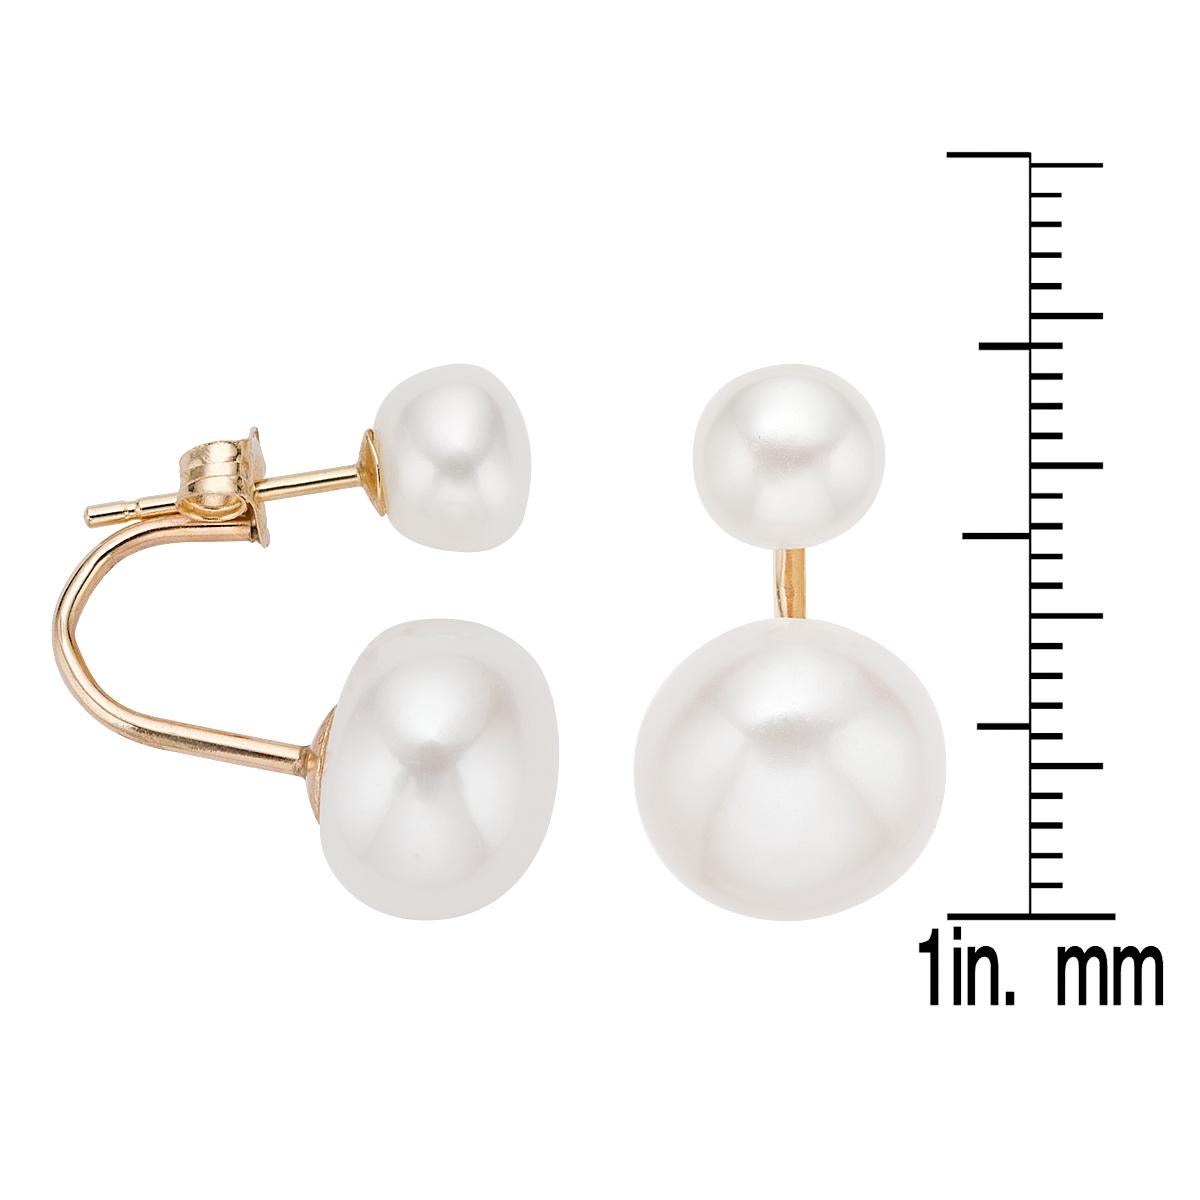 Combining elements of dangle and stud styles, this pair of unique earrings feature small pearl studs as well as larger pearls that dangle beneath. The bodies of the earrings are made of rich 14 karat yellow gold.

Cultured Freshwater Pearls:
Grade: